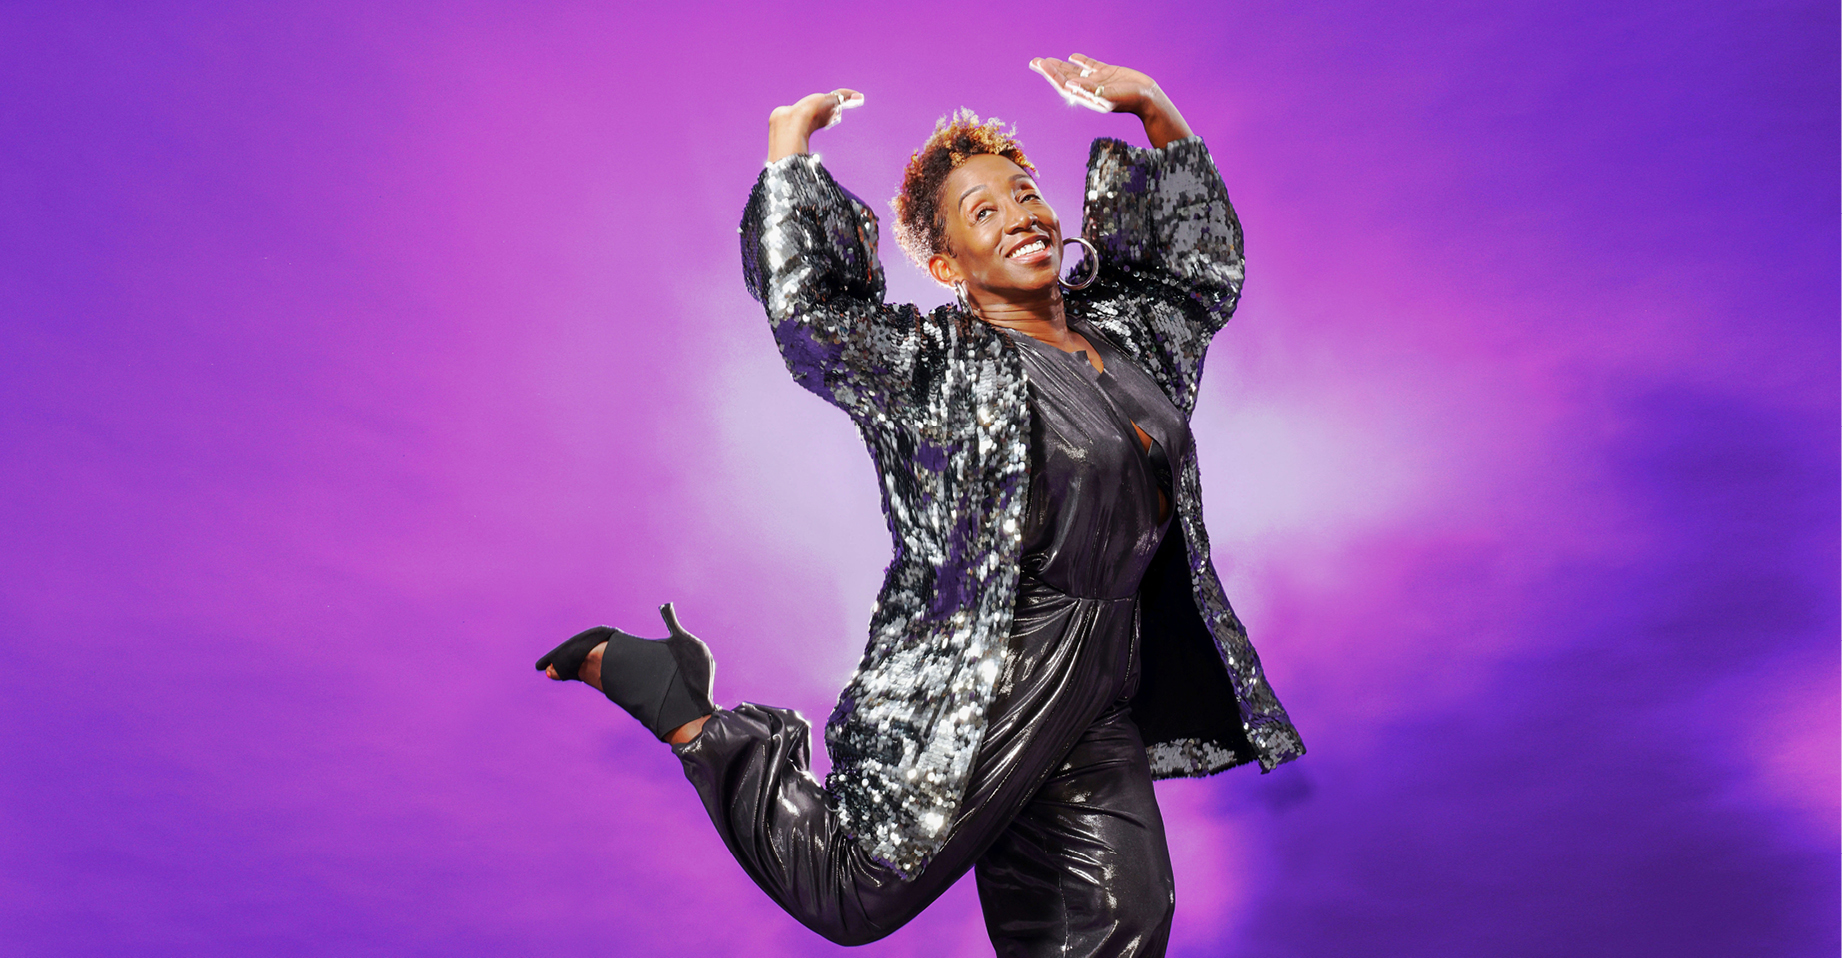 In front of a bright purple backdrop, and with a big smile, LaTasha Barnes is wearing a sparkling cardigan, metallic gray pants, and black high heels as she lifts both arms, and kicks a leg back.